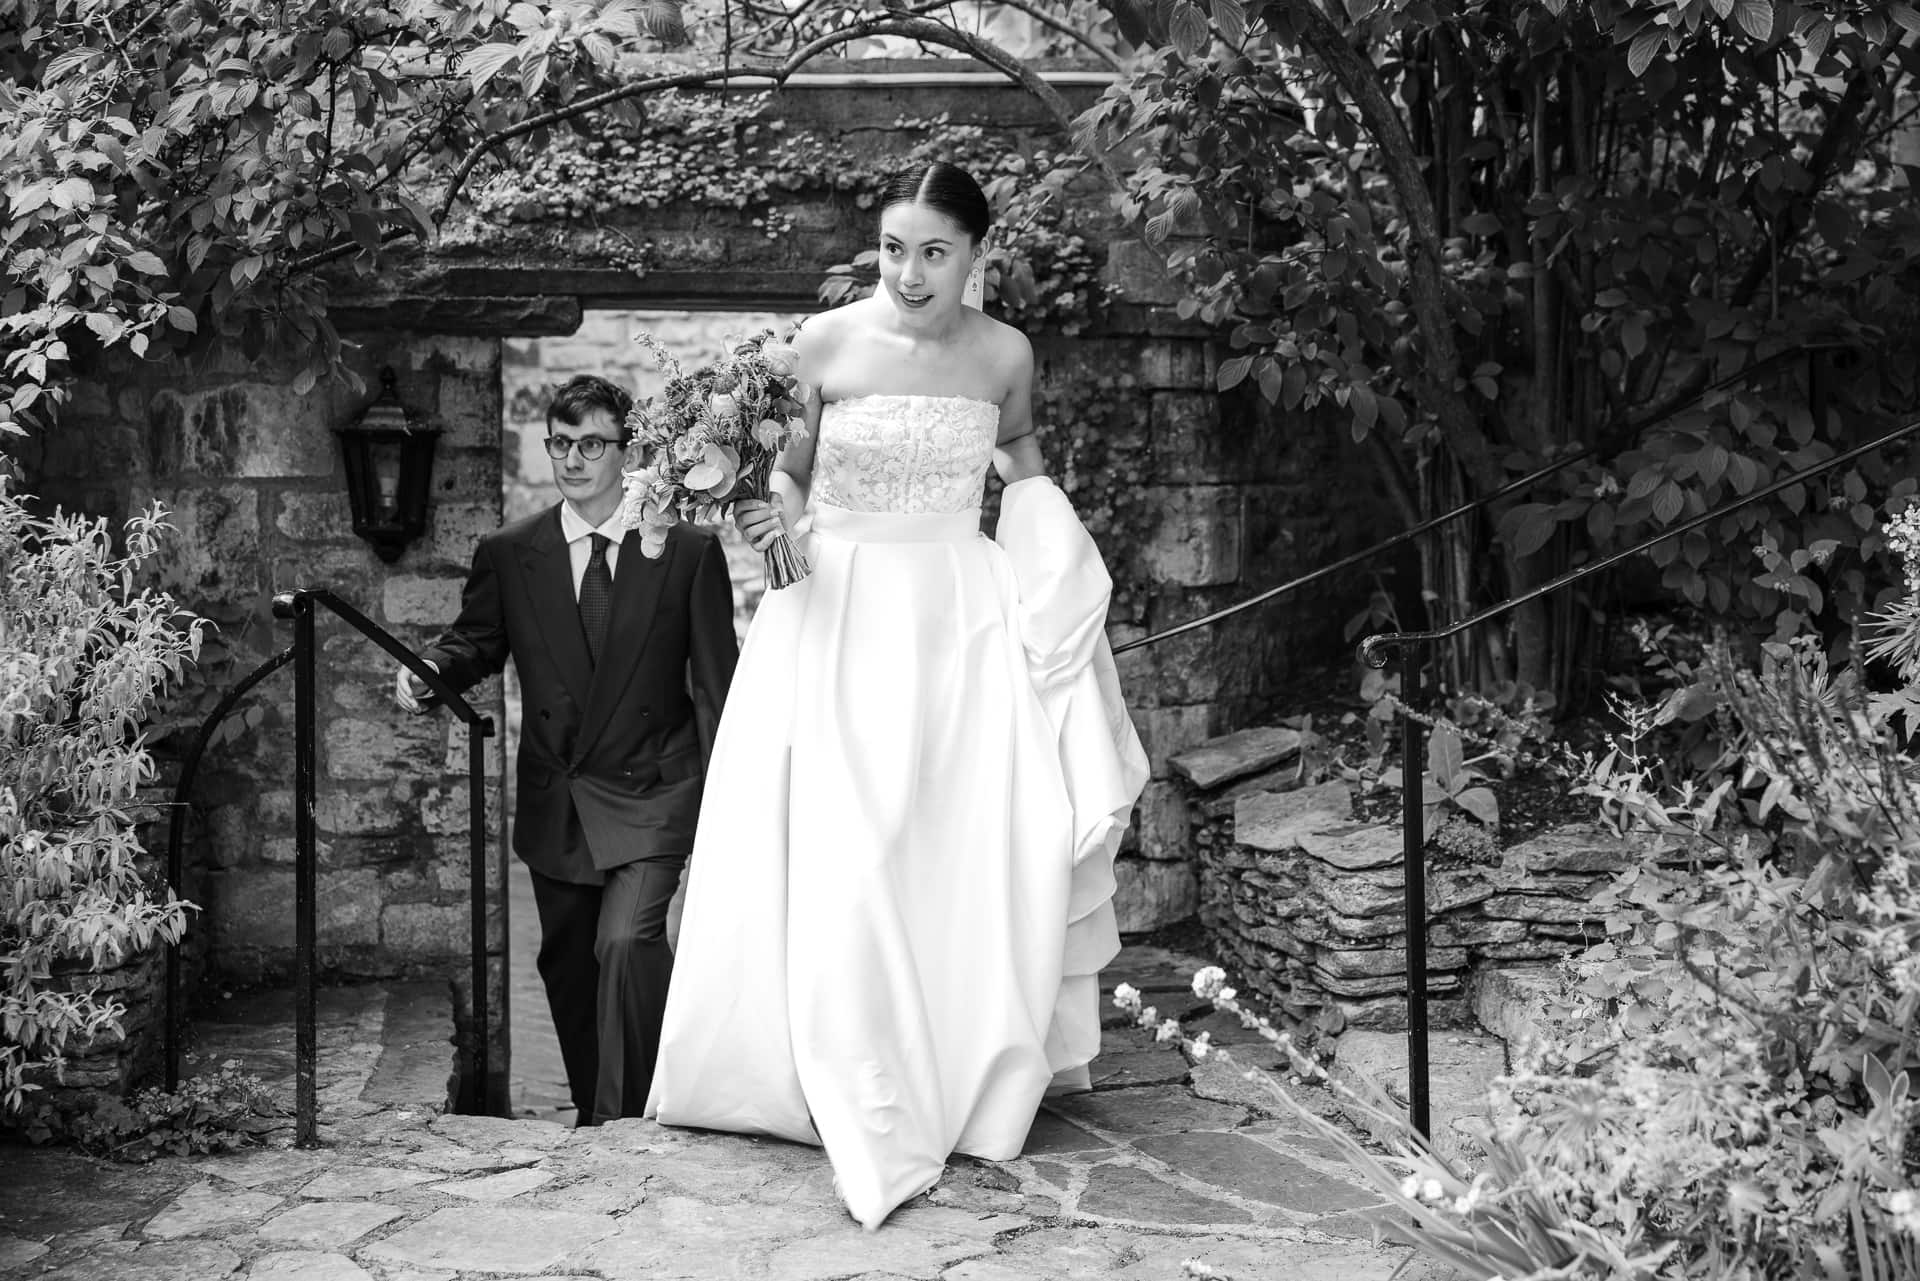 The Bride and Groom walking up the steps looking at the guests at the Master’s Garden at Pembroke College